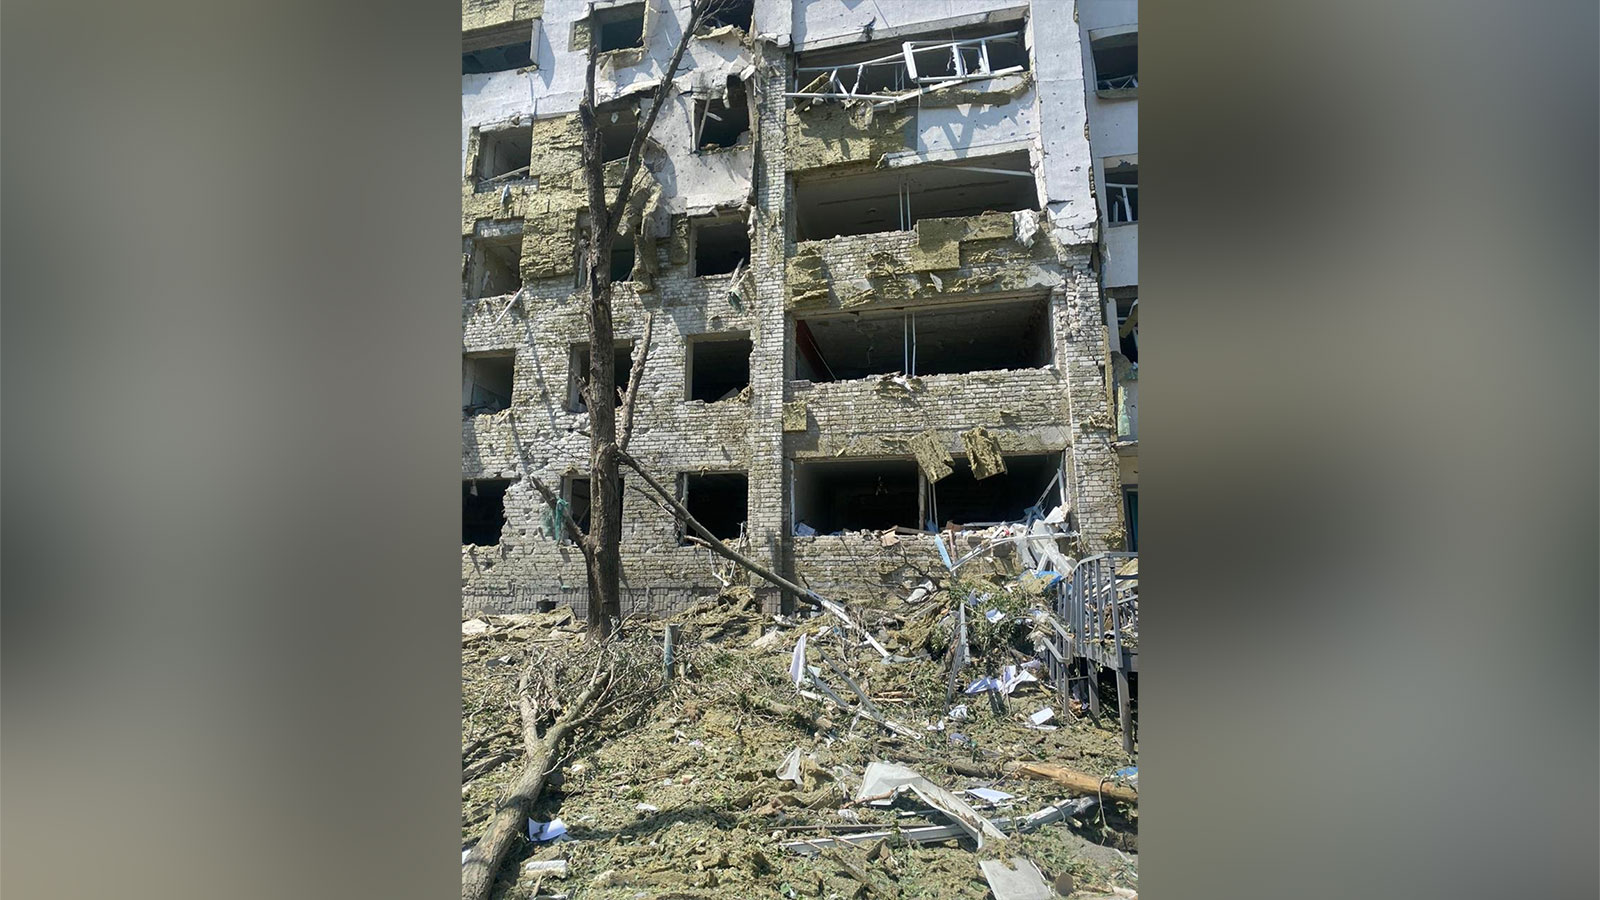 Andriy Yermak, head of the Office of the President of Ukraine, posted this image of a building he said was the hospital shelled in the city of Huliaipole, Ukraine.